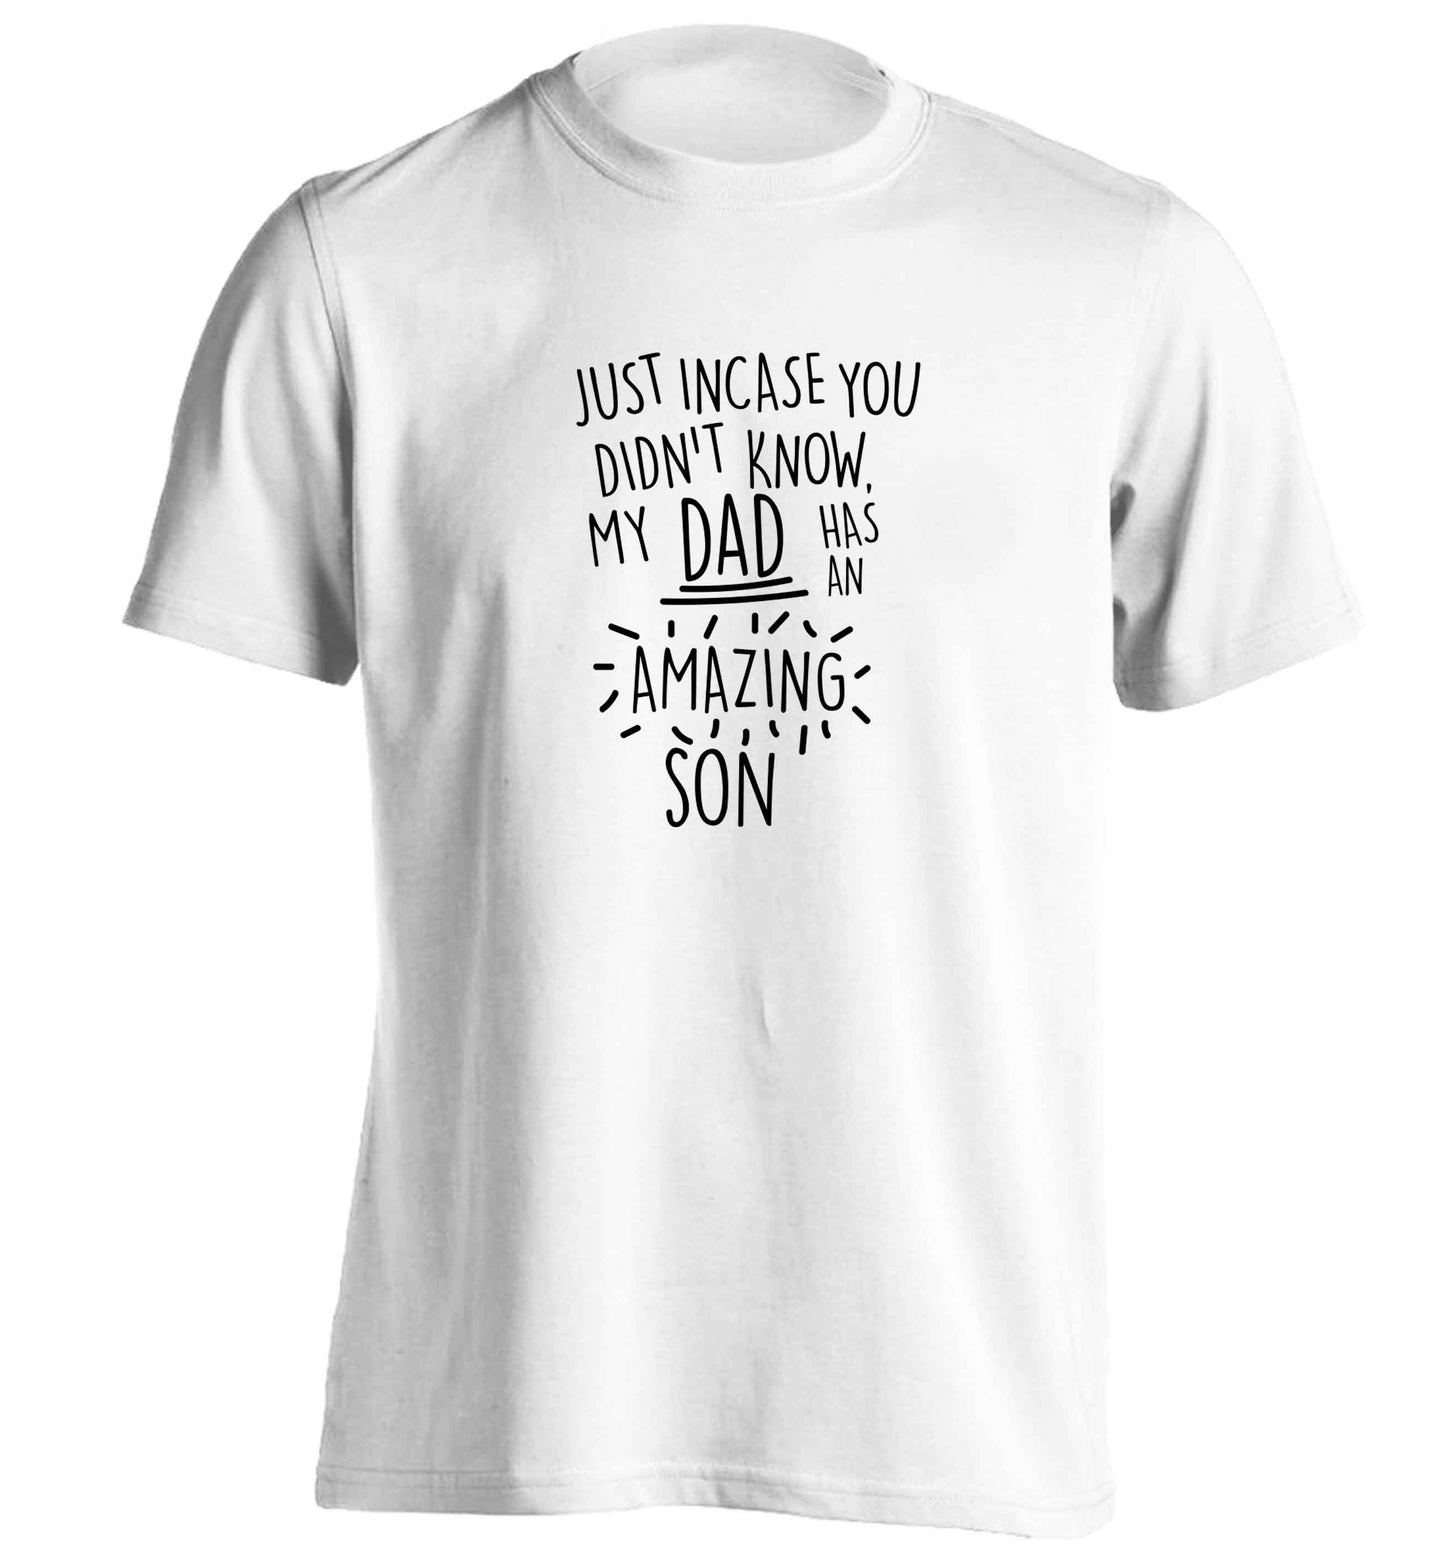 Just incase you didn't know my dad has an amazing son adults unisex white Tshirt 2XL